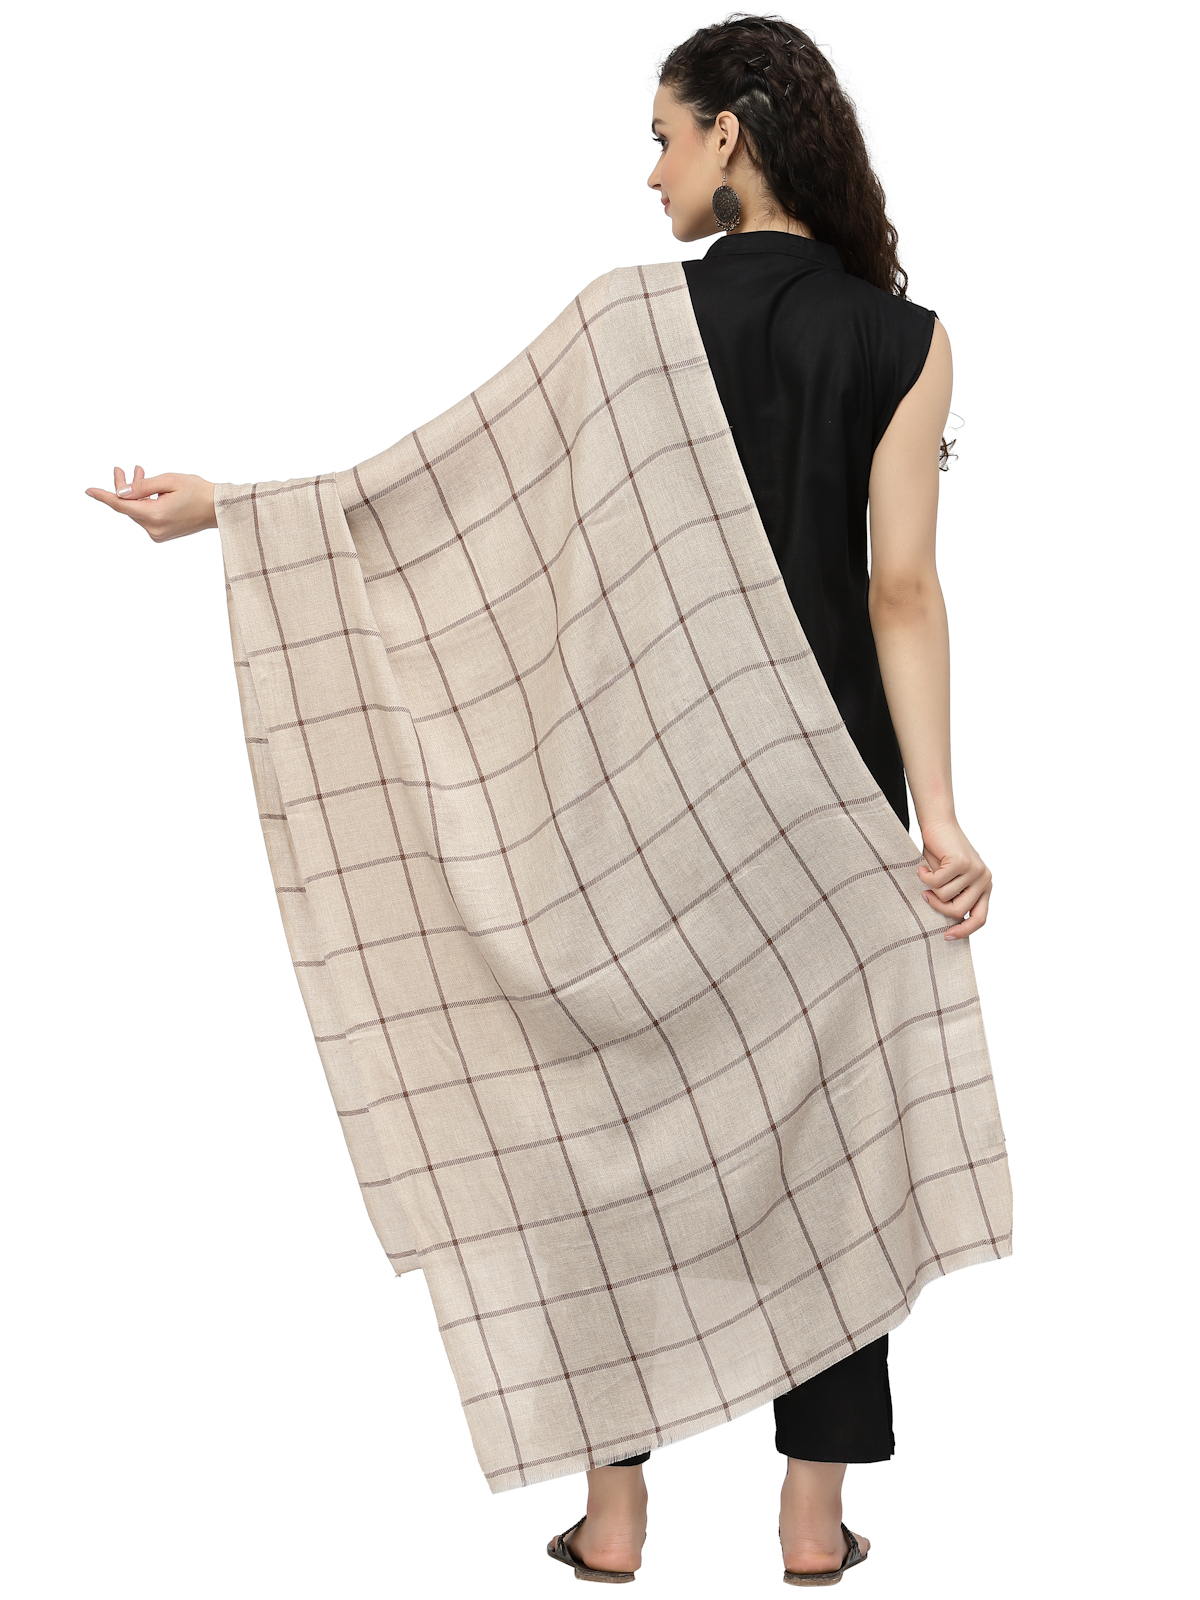 Spatial Woven Design Acrowool Stole